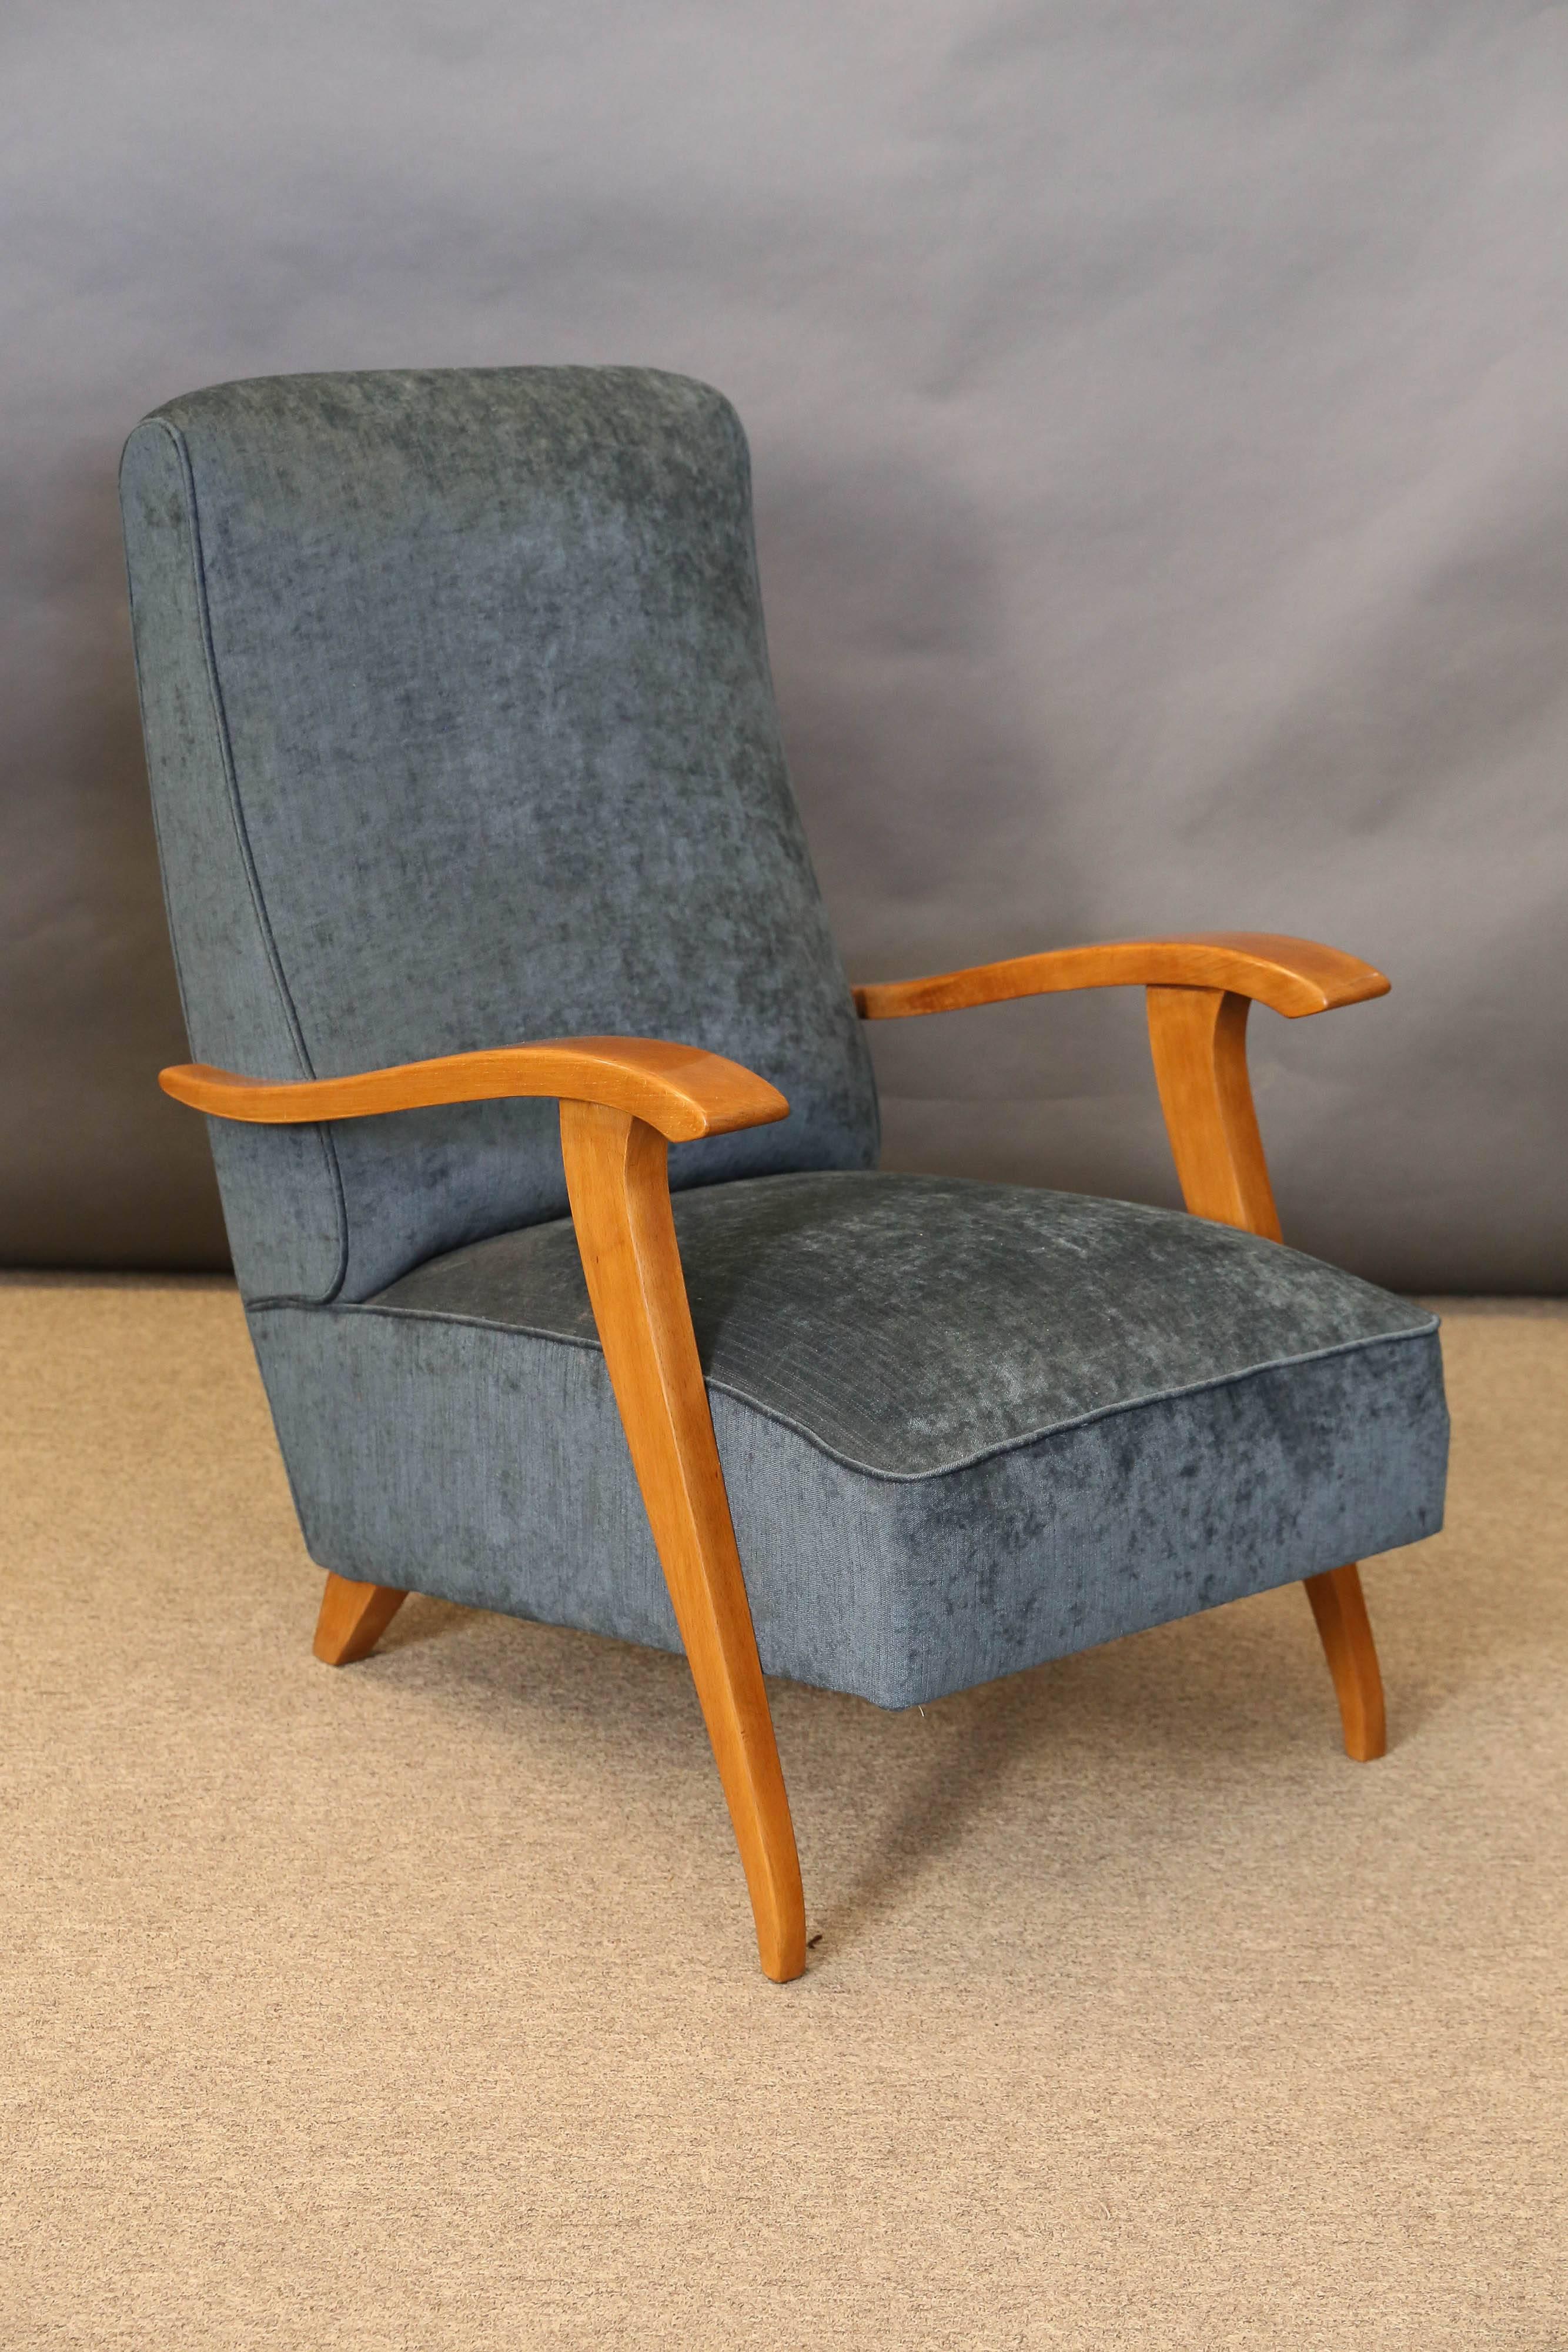 Each chair is newly re-upholstered in blue velvety fabric. Body of the chair is made out of beech wood. Back part of the chair is elevated be the small square legs. Front is elevated by skinny elongated legs that are connected to the bottom of each